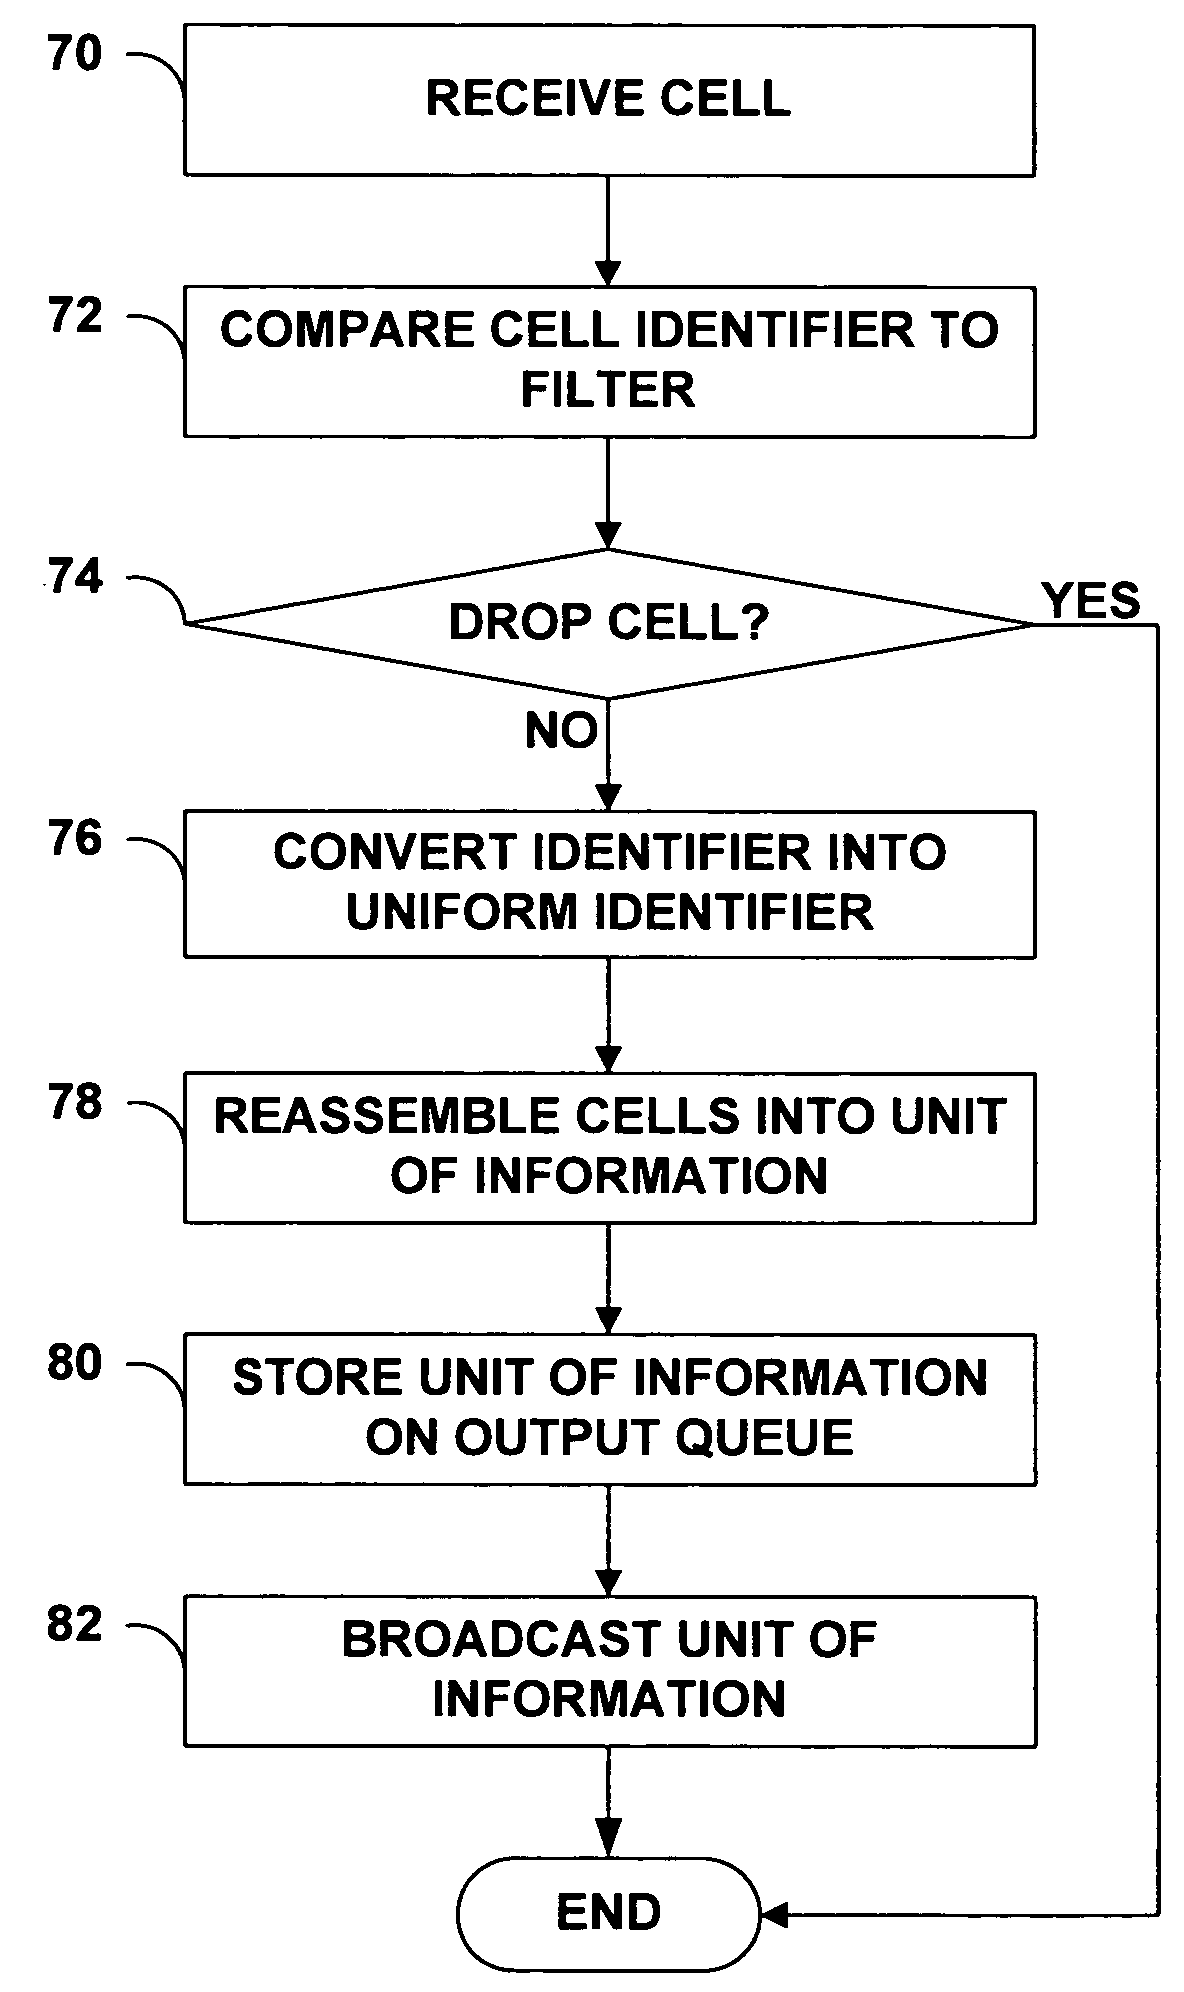 Merging multiple data flows in a passive optical network